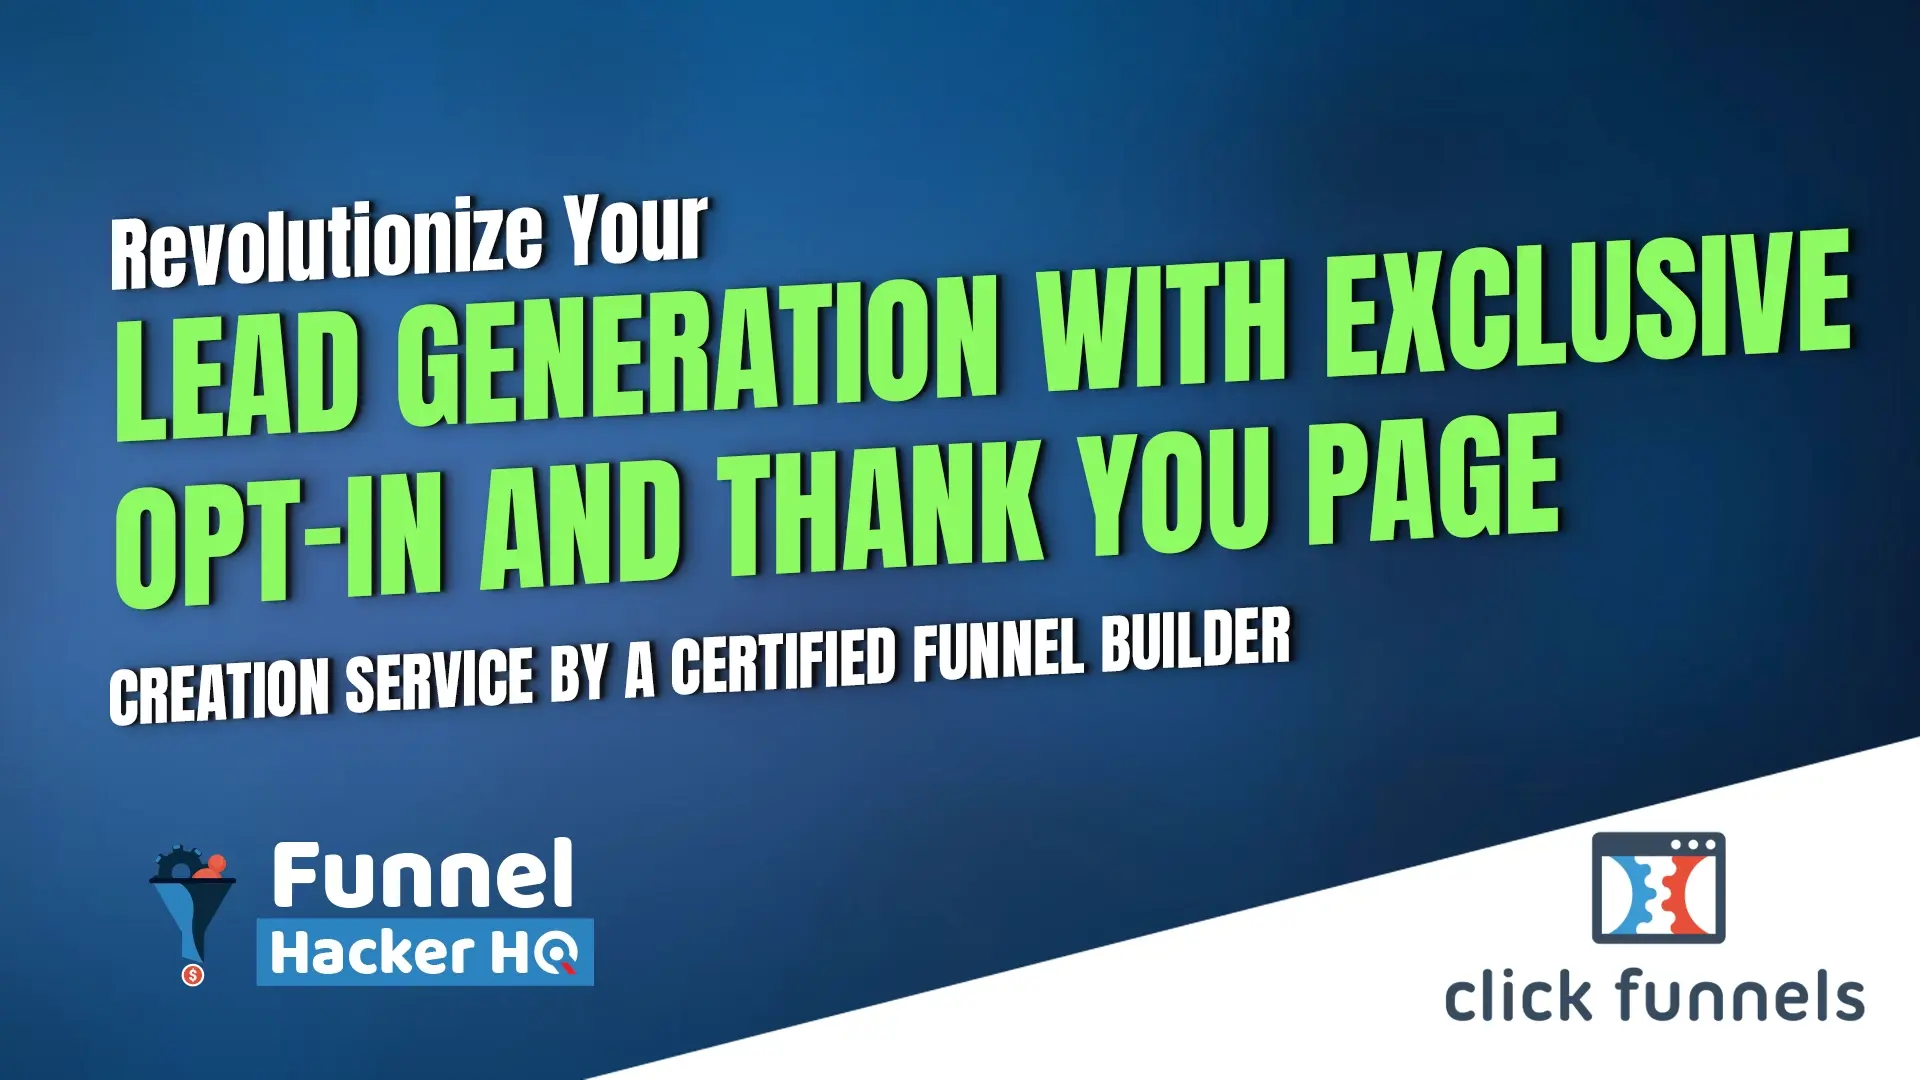 Revolutionize Your Lead Generation with Exclusive Opt-In and Thank You Page Creation Service by a Certified Funnel Builder